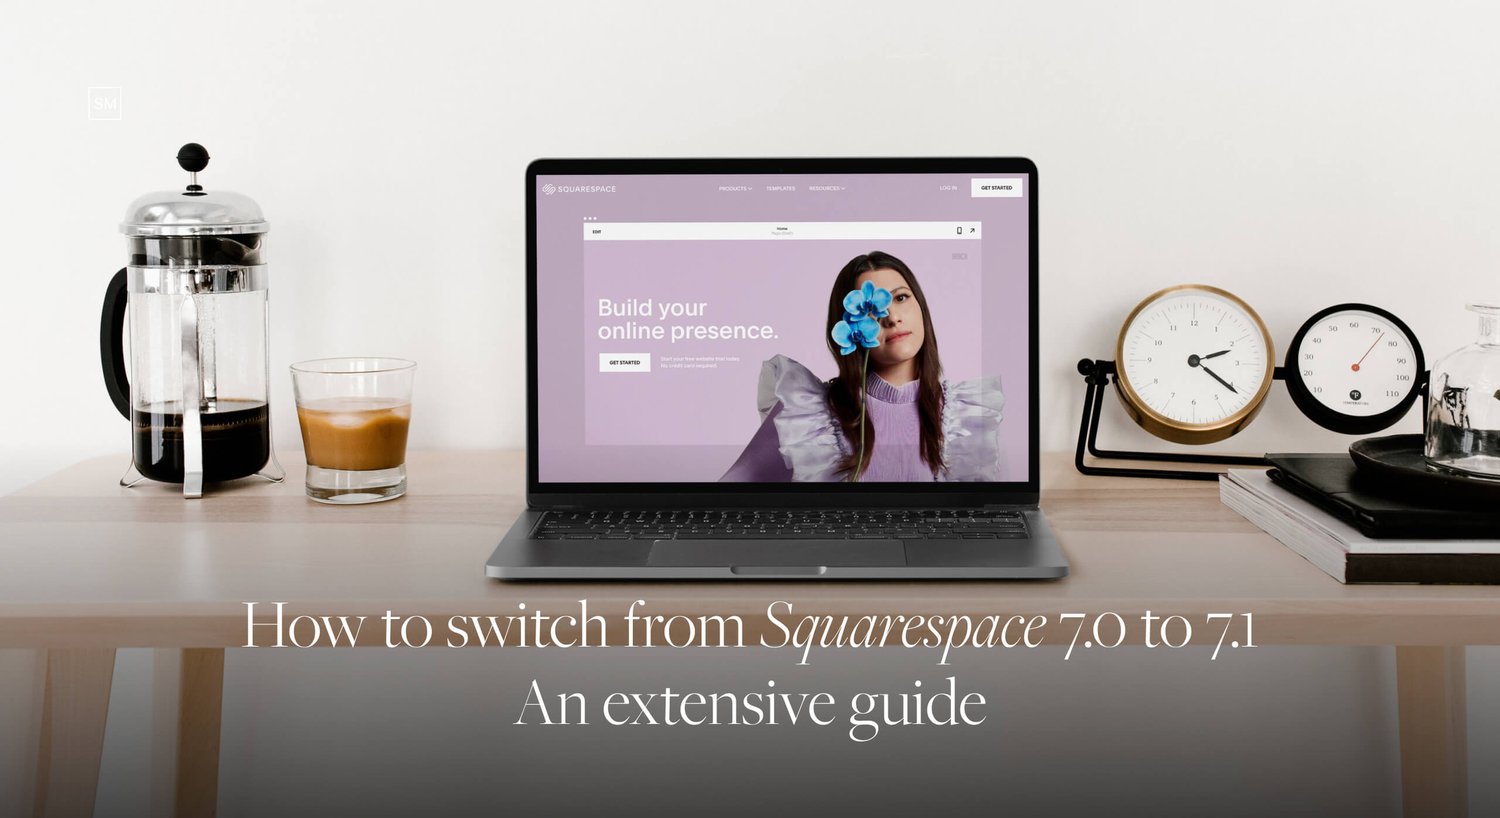 How to switch from Squarespace 7.0 to 7.1 version. An extensive guide